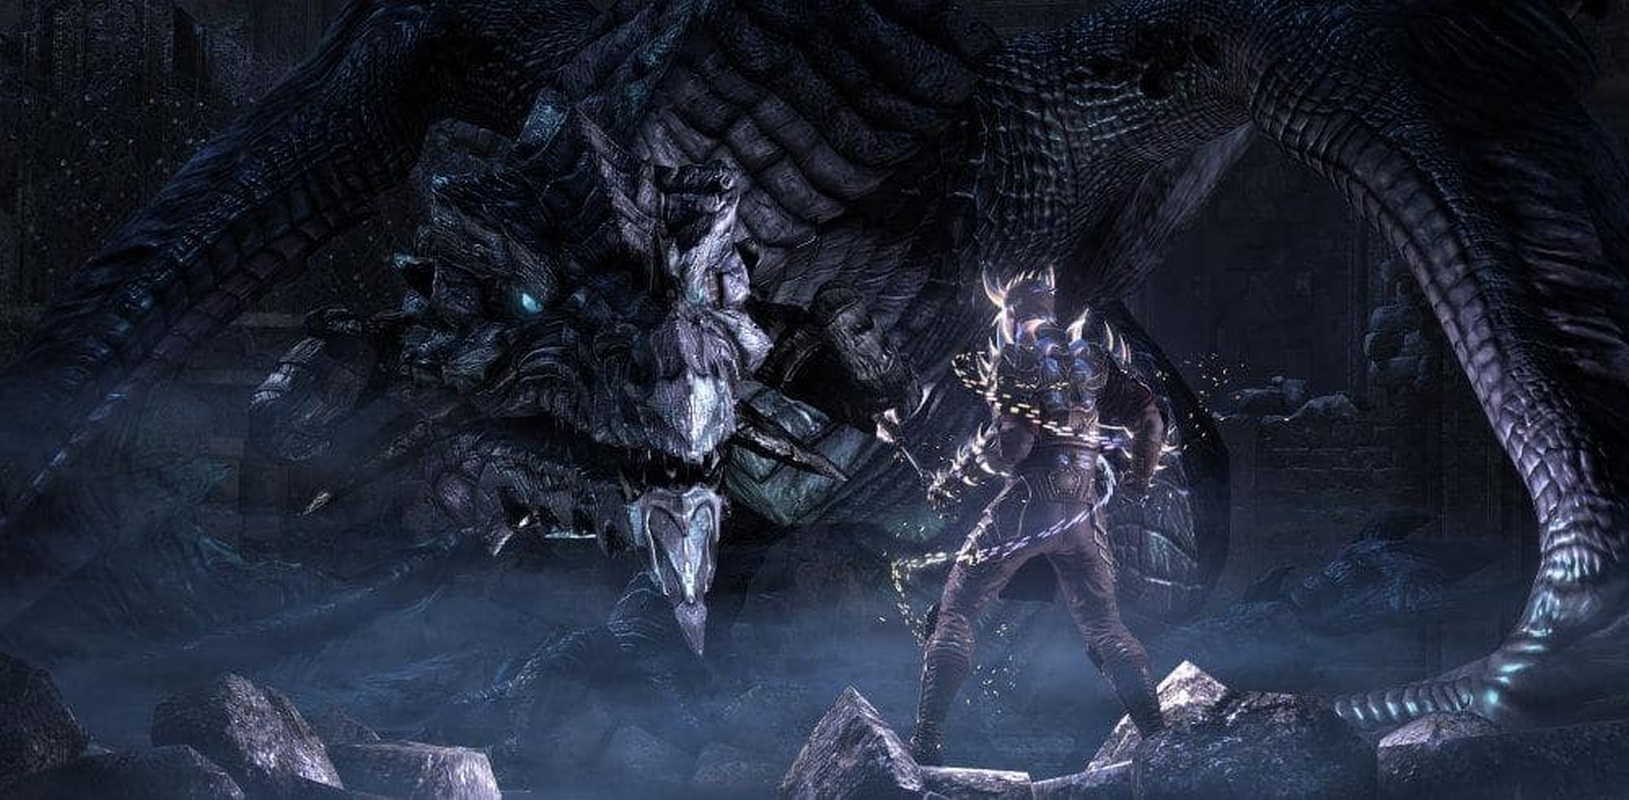 Elder Scrolls Online Teams Up With Streamers For #SlayDragonsSaveCats Charity Event